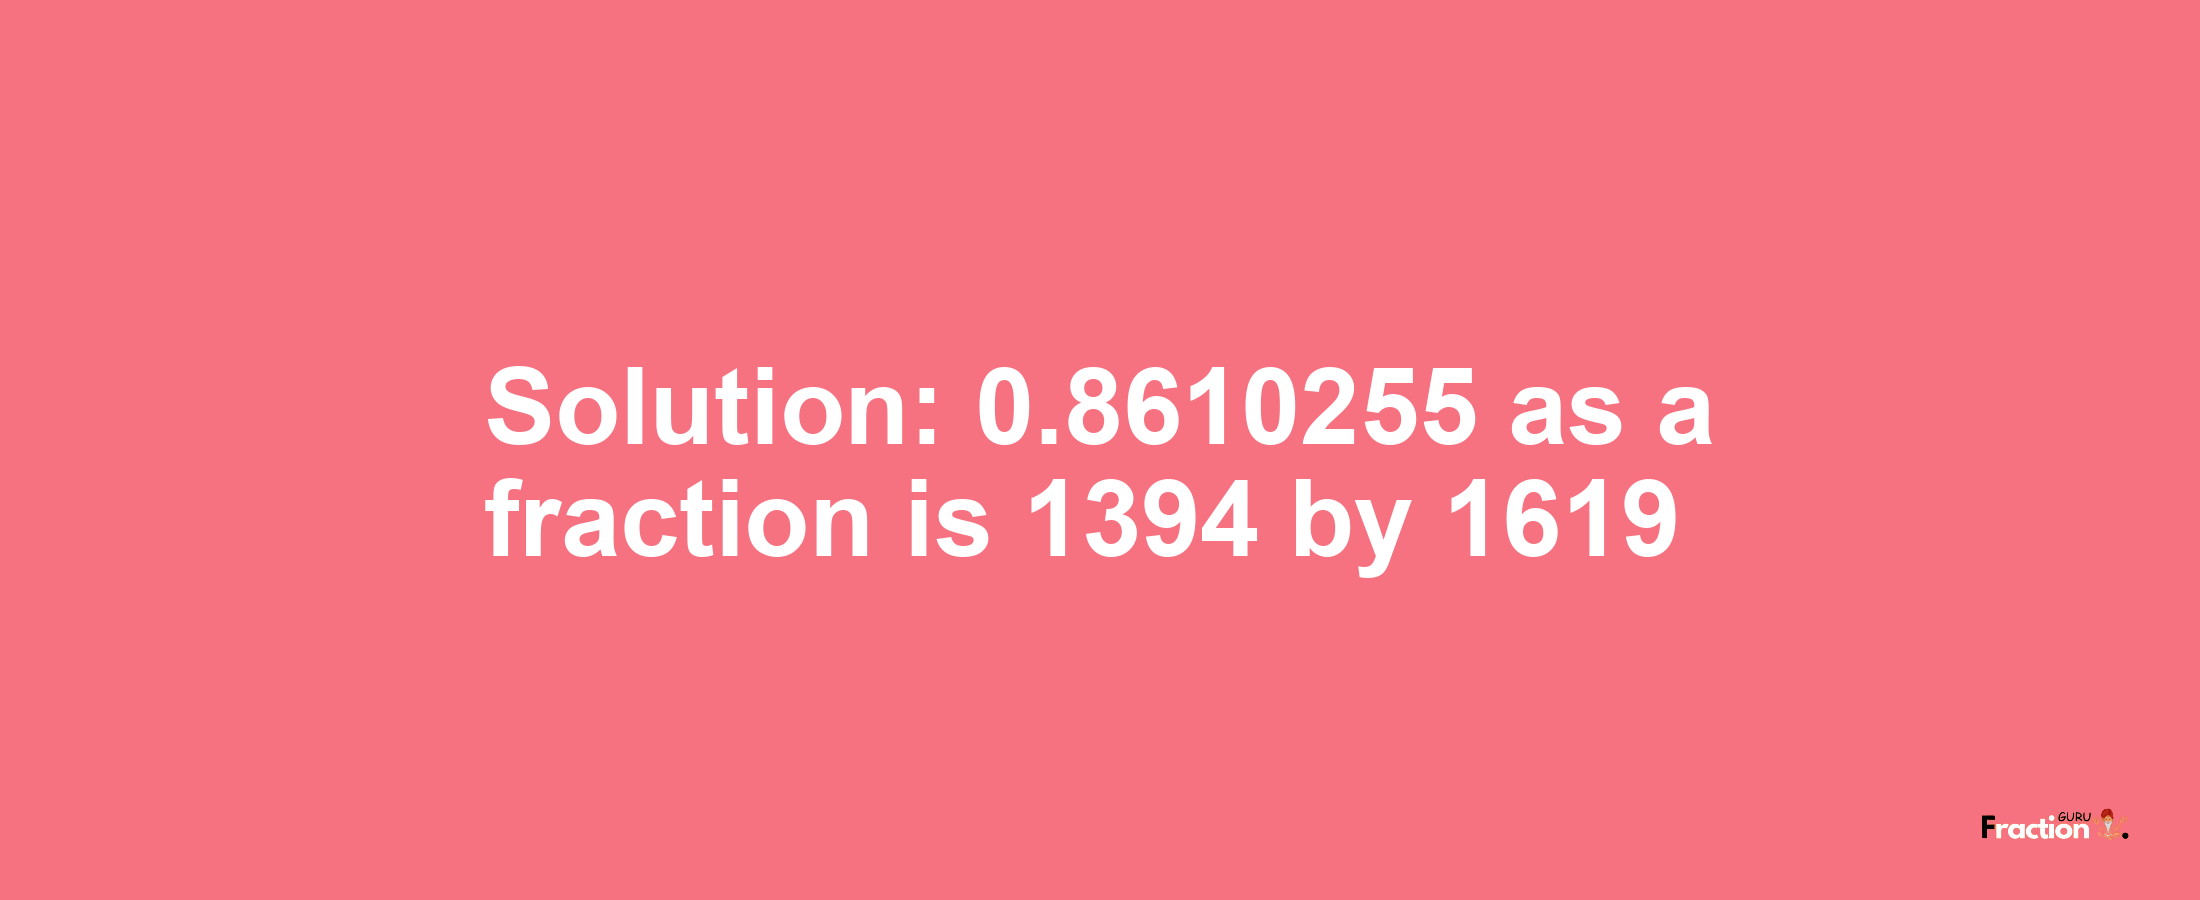 Solution:0.8610255 as a fraction is 1394/1619